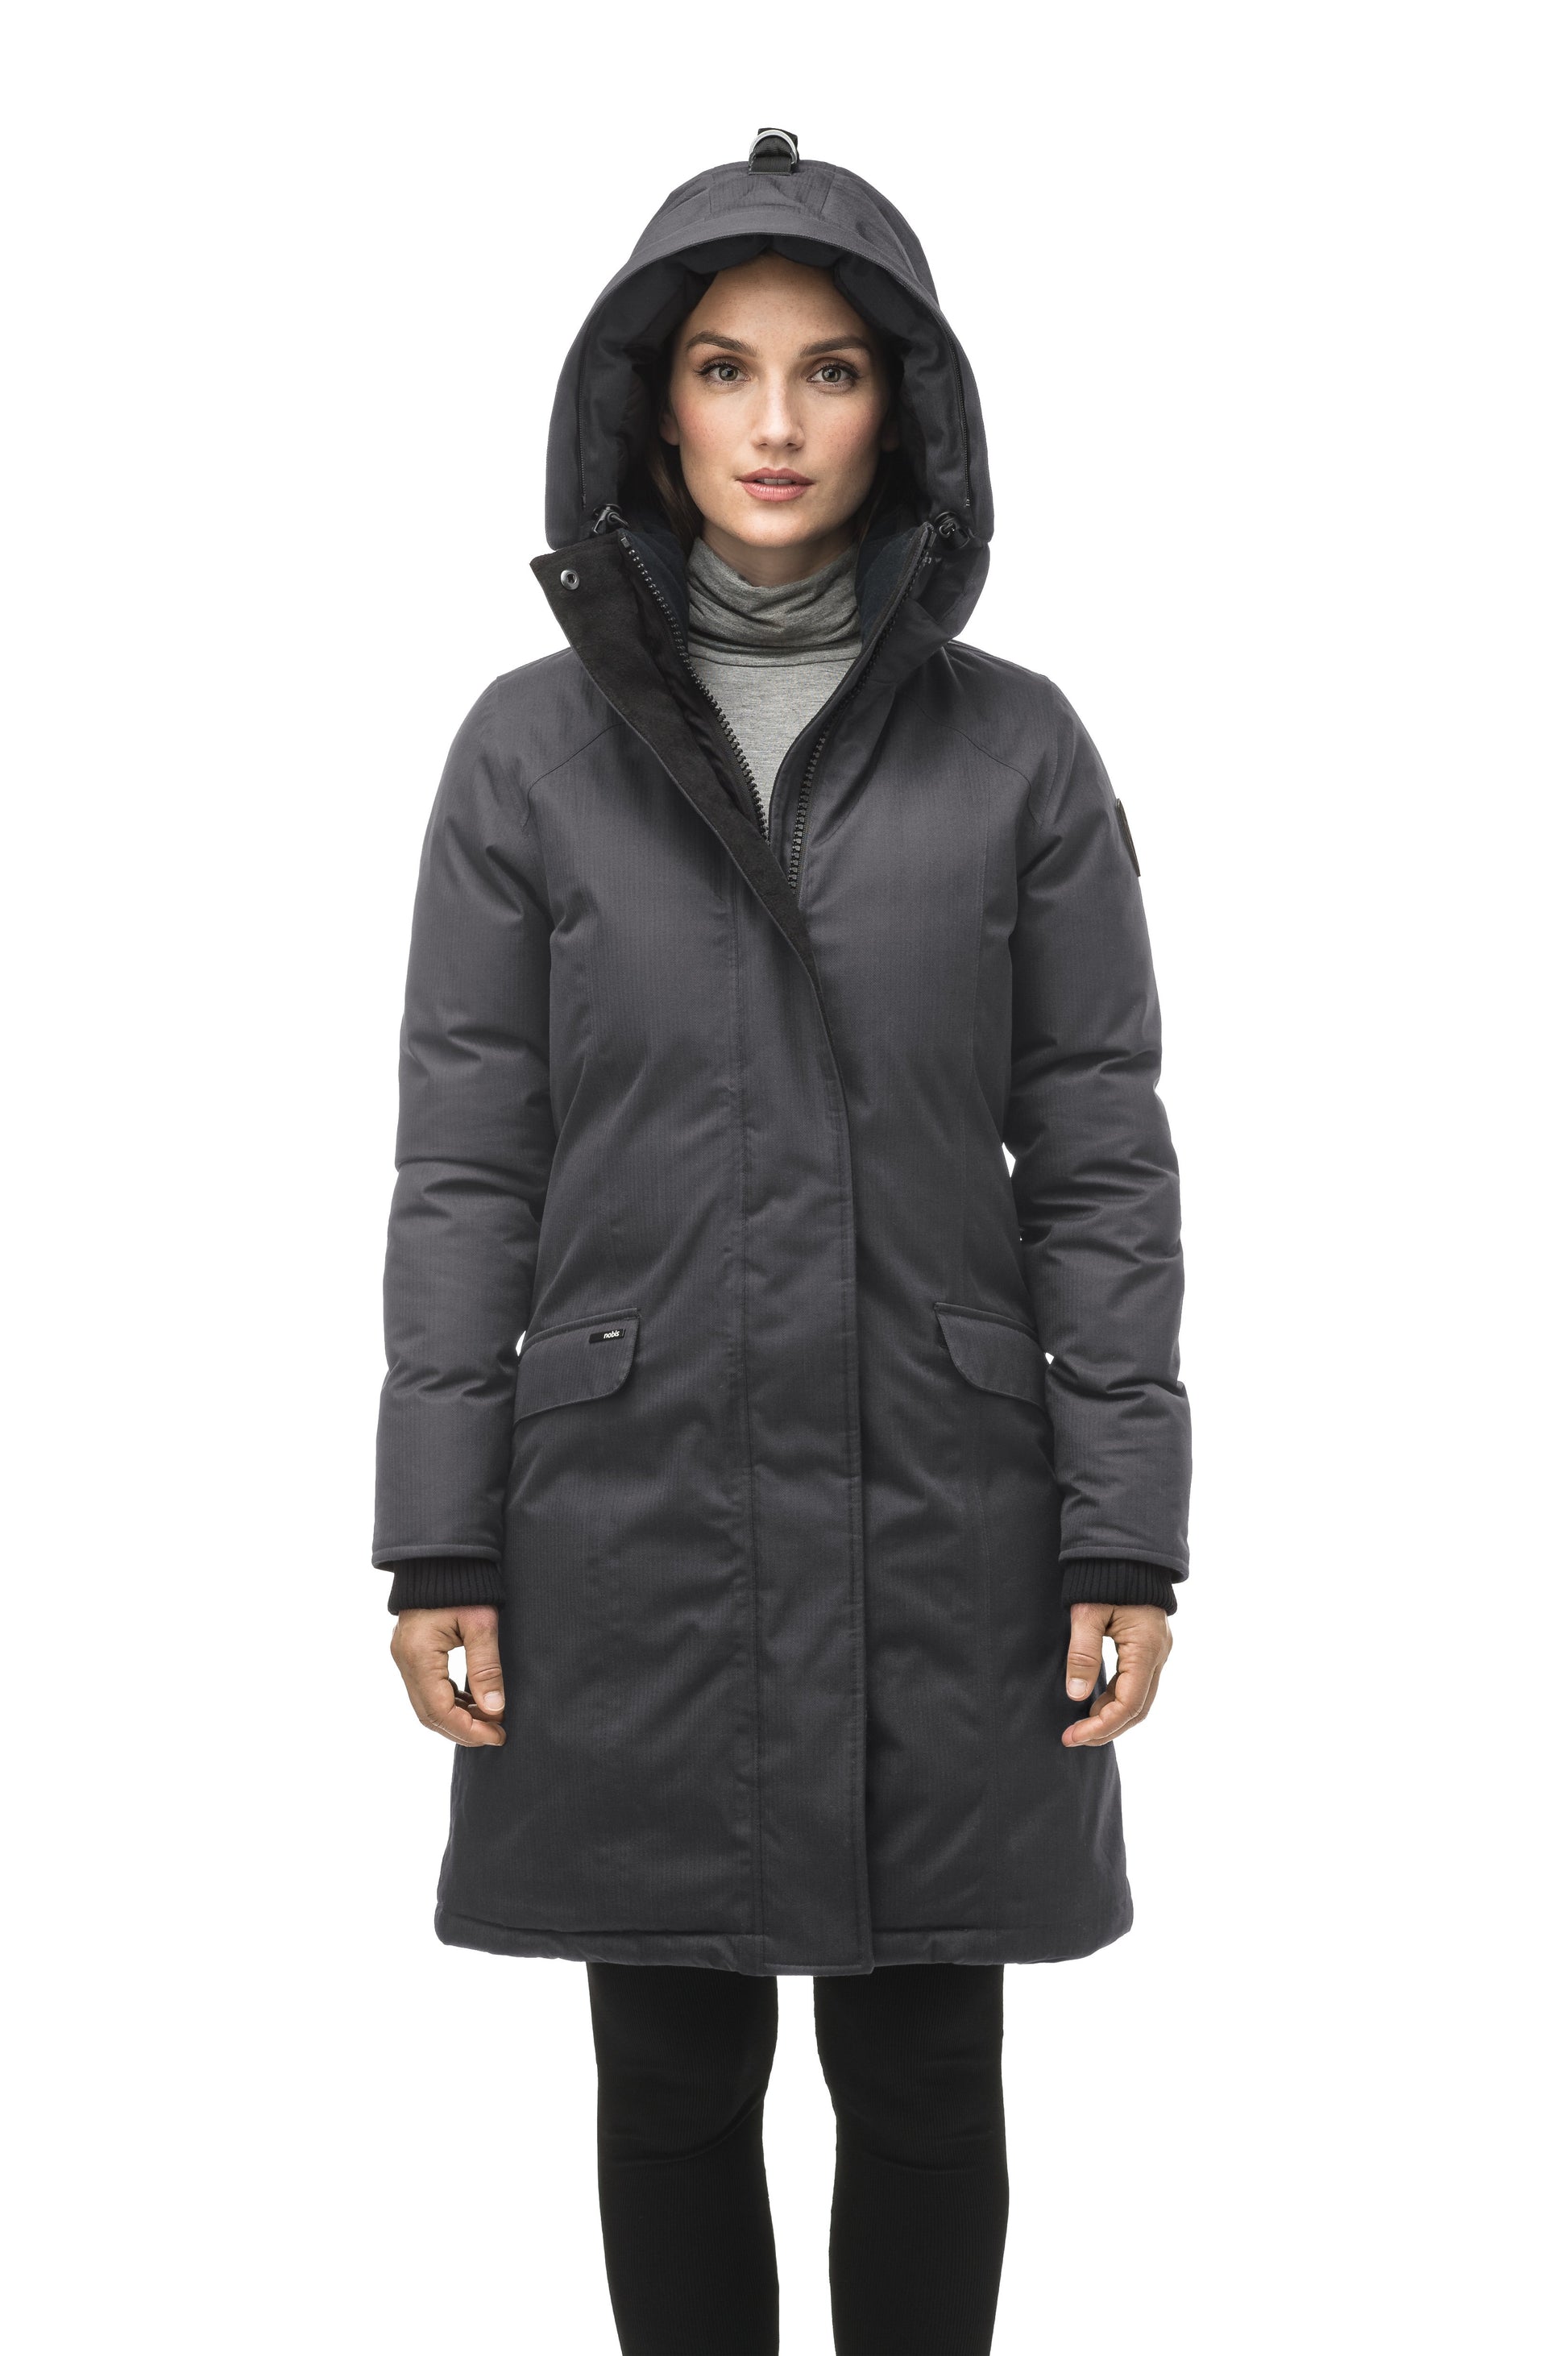 Rebecca Women's Parka in knee length, Canadian duck down insulation, two-way zipper with magnetic front placket, non-removable hood with removable coyote fur trim, in Steel Grey